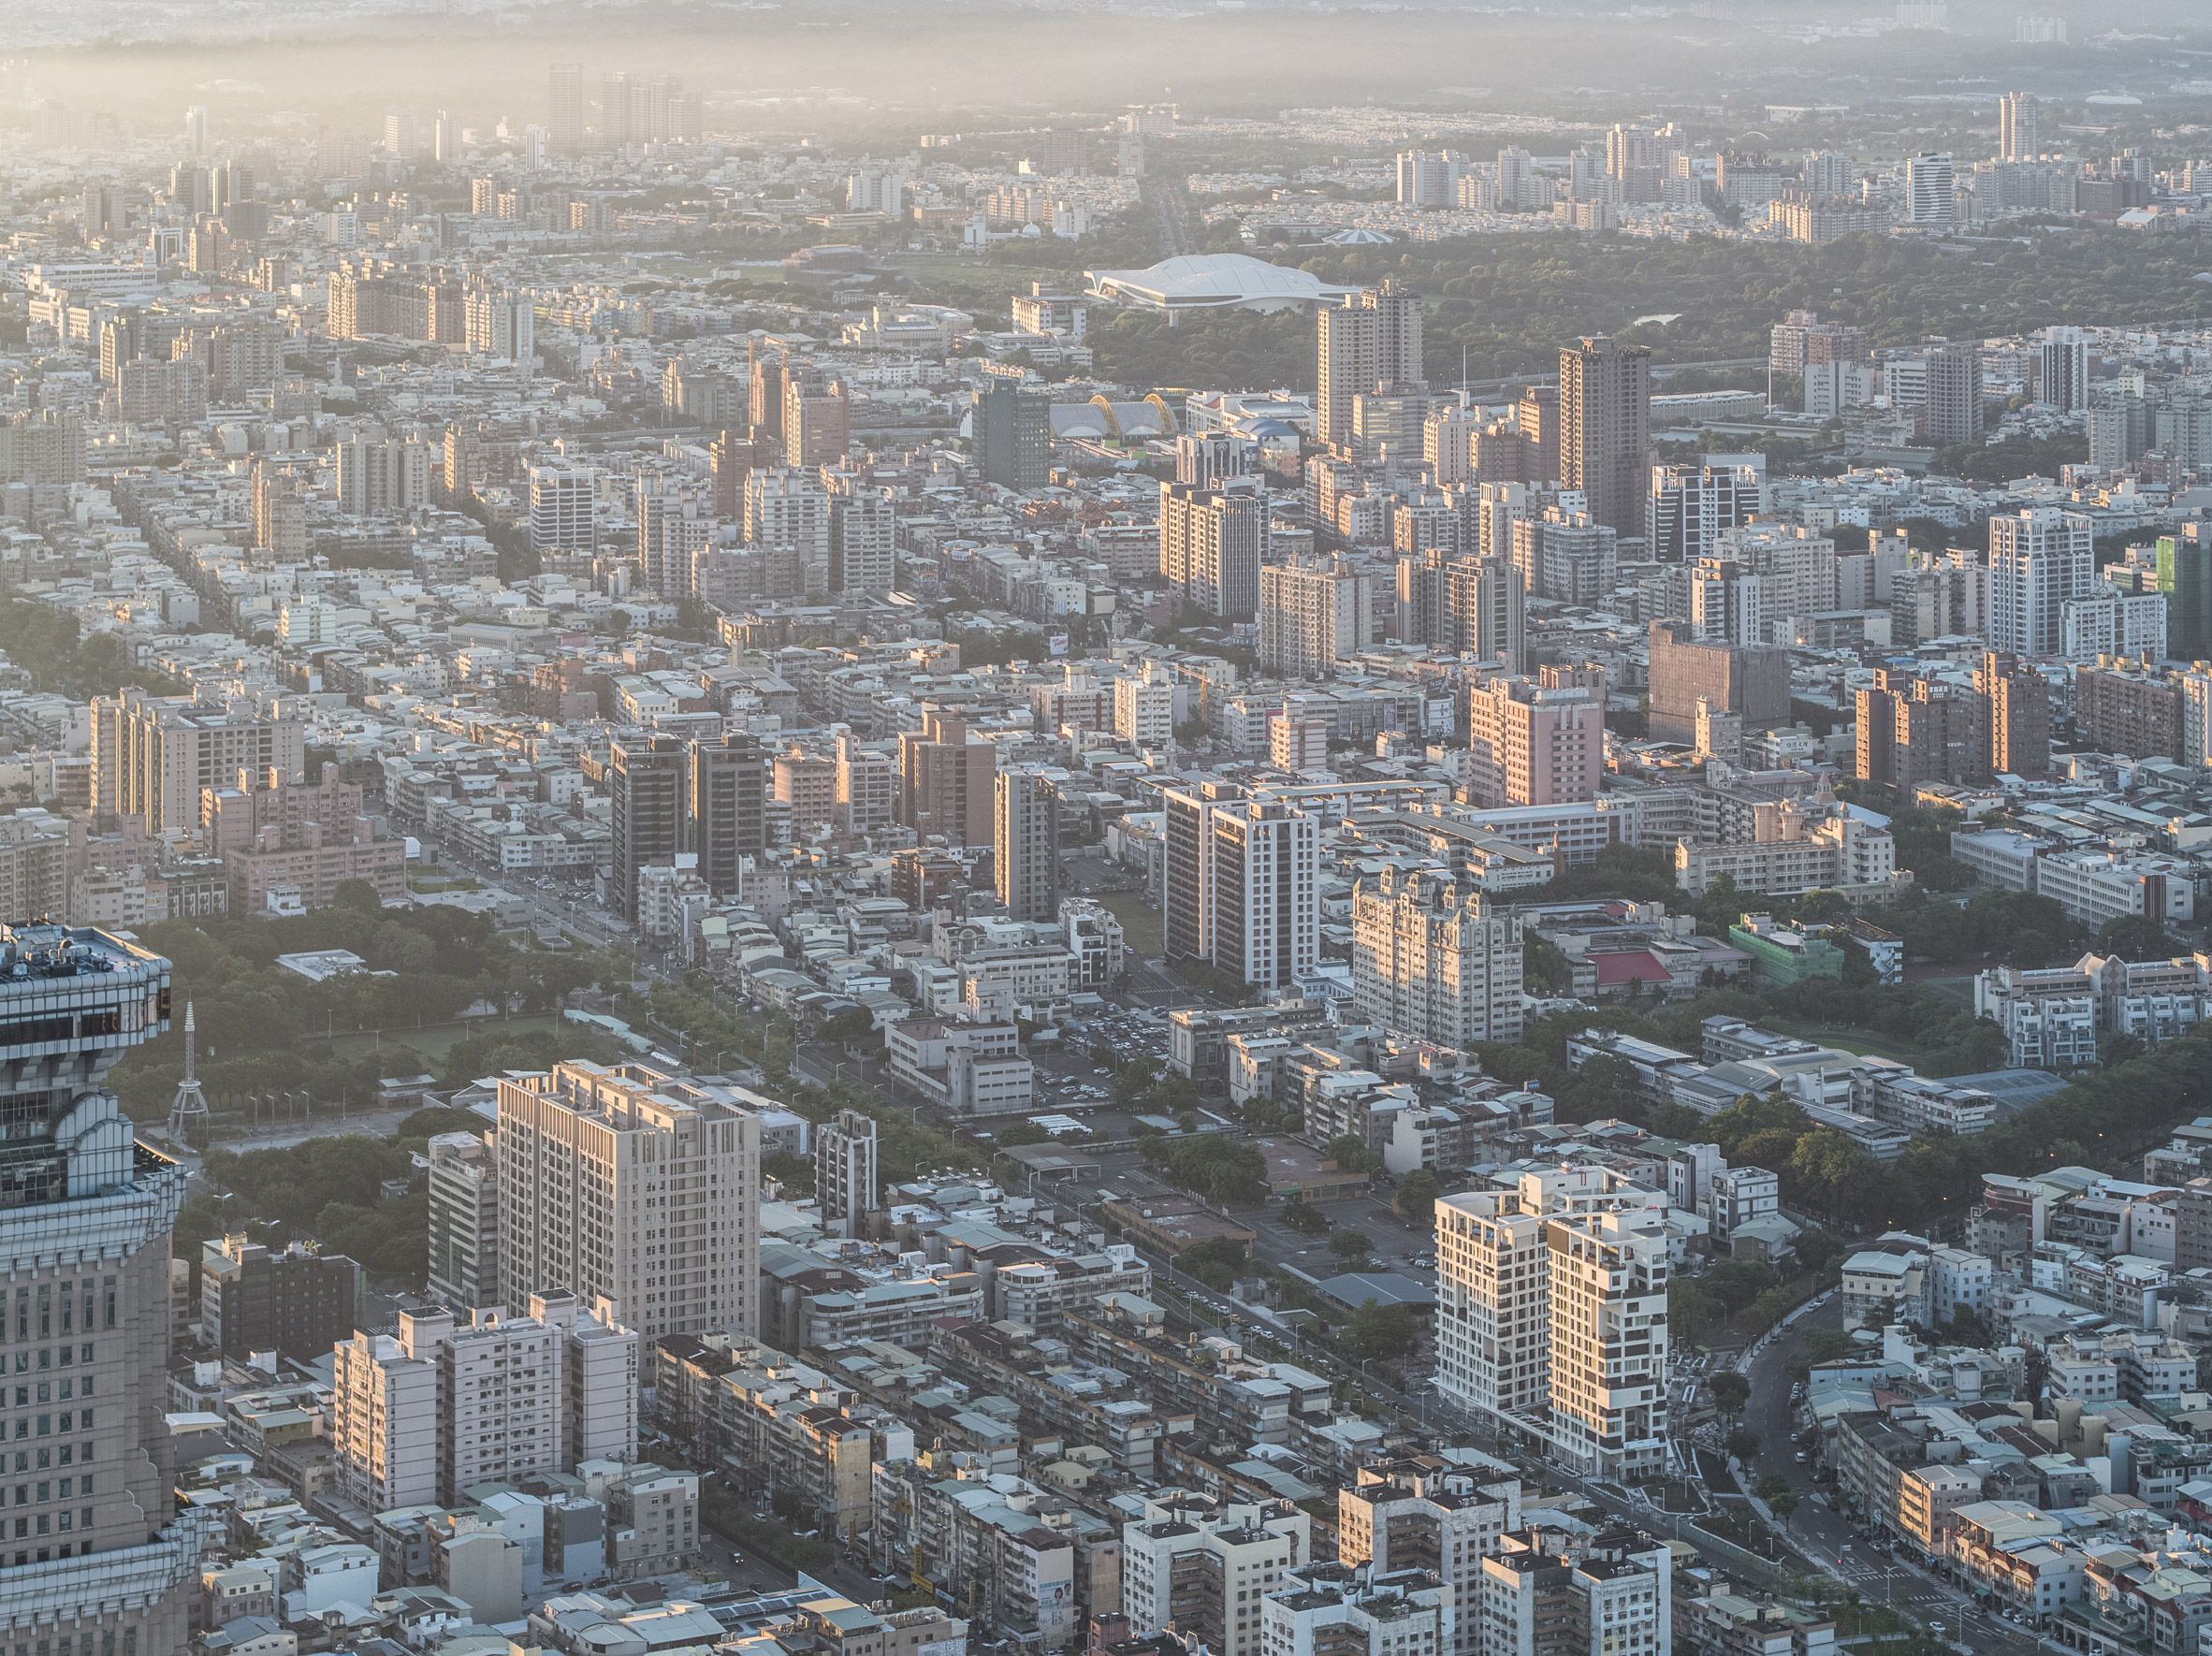 Aerial shot of Kaohsiung